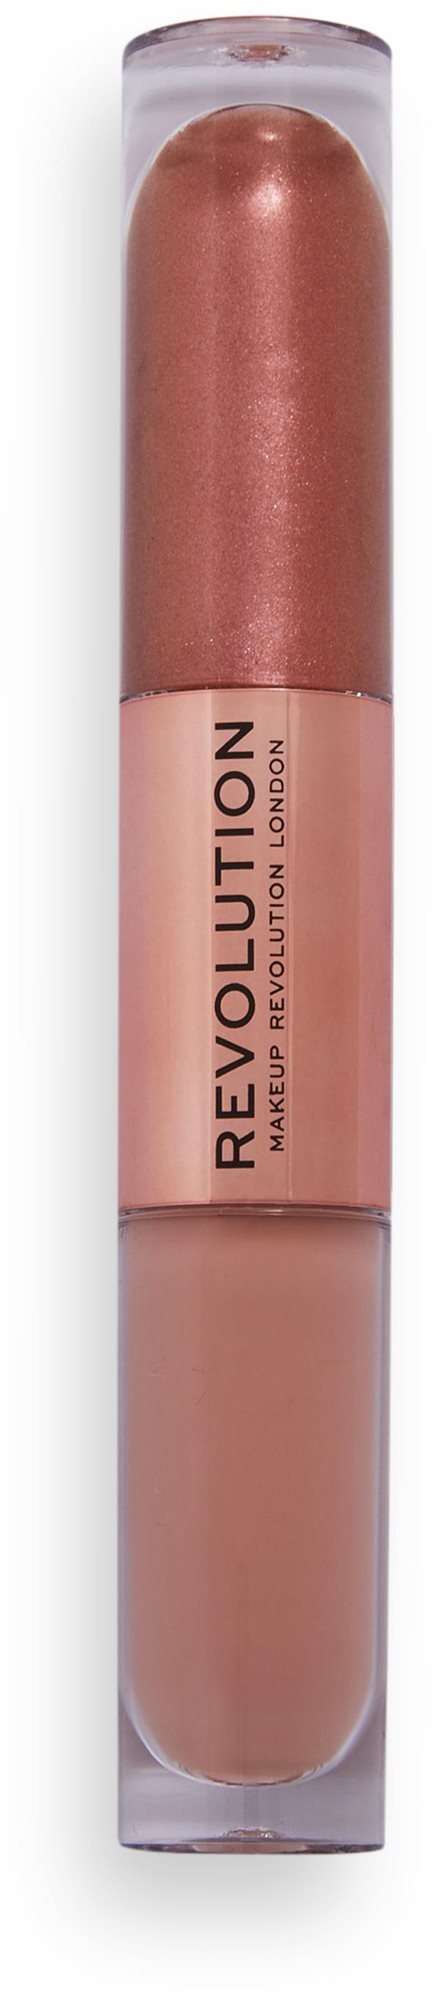 REVOLUTION Double Up Liquid Shadow Infatuated Rose Gold